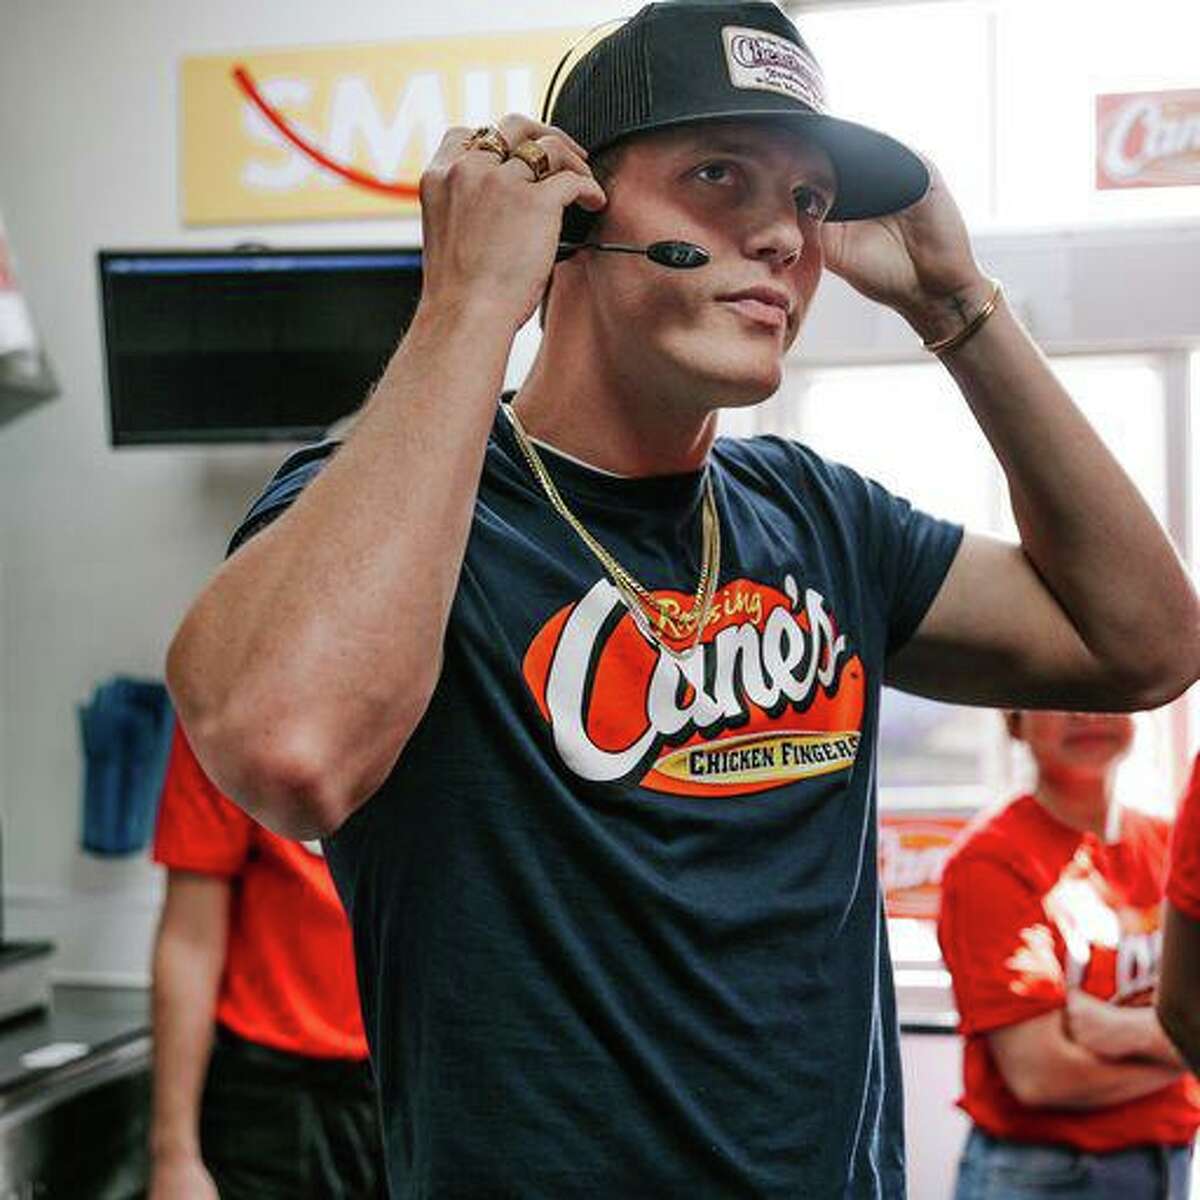 Raising Cane’s and RodeoHouston headliner Parker McCollum teamed up for a special hometown lunch by serving chicken finger meals to local Caniacs and fans at the Raising Cane’s located at 2127 W. Davis St. in Conroe Monday.